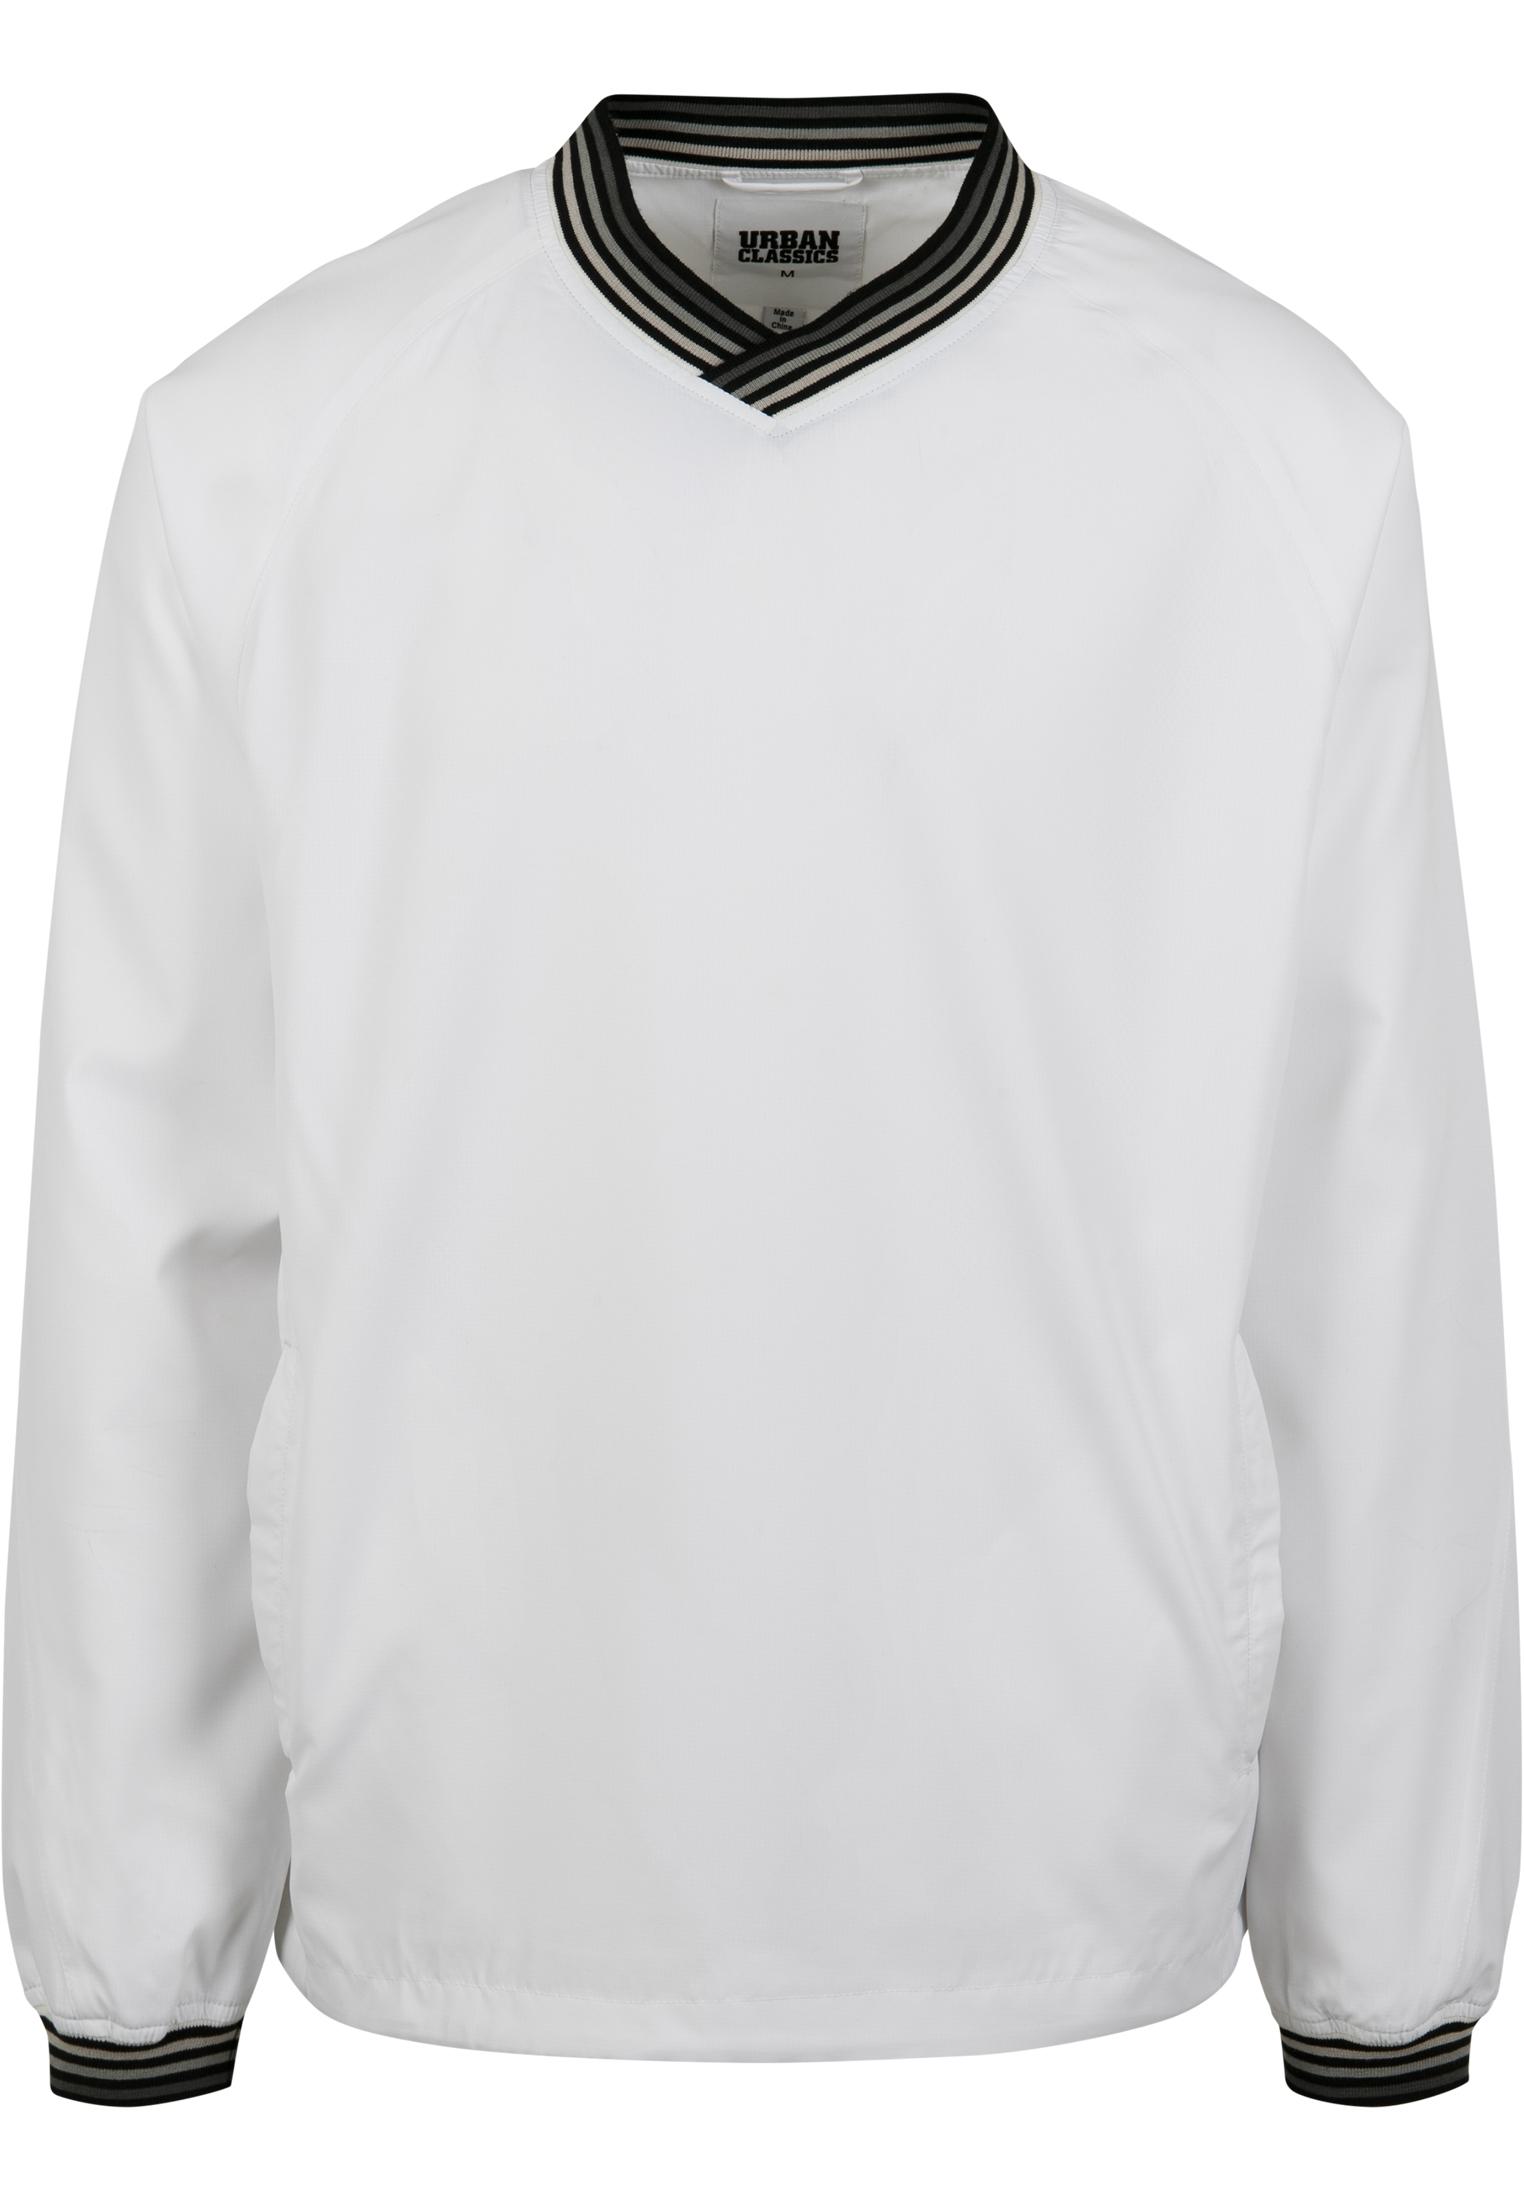 UC Men Warm Up Pull Over (Farbe: wht/gry / Größe: XL)